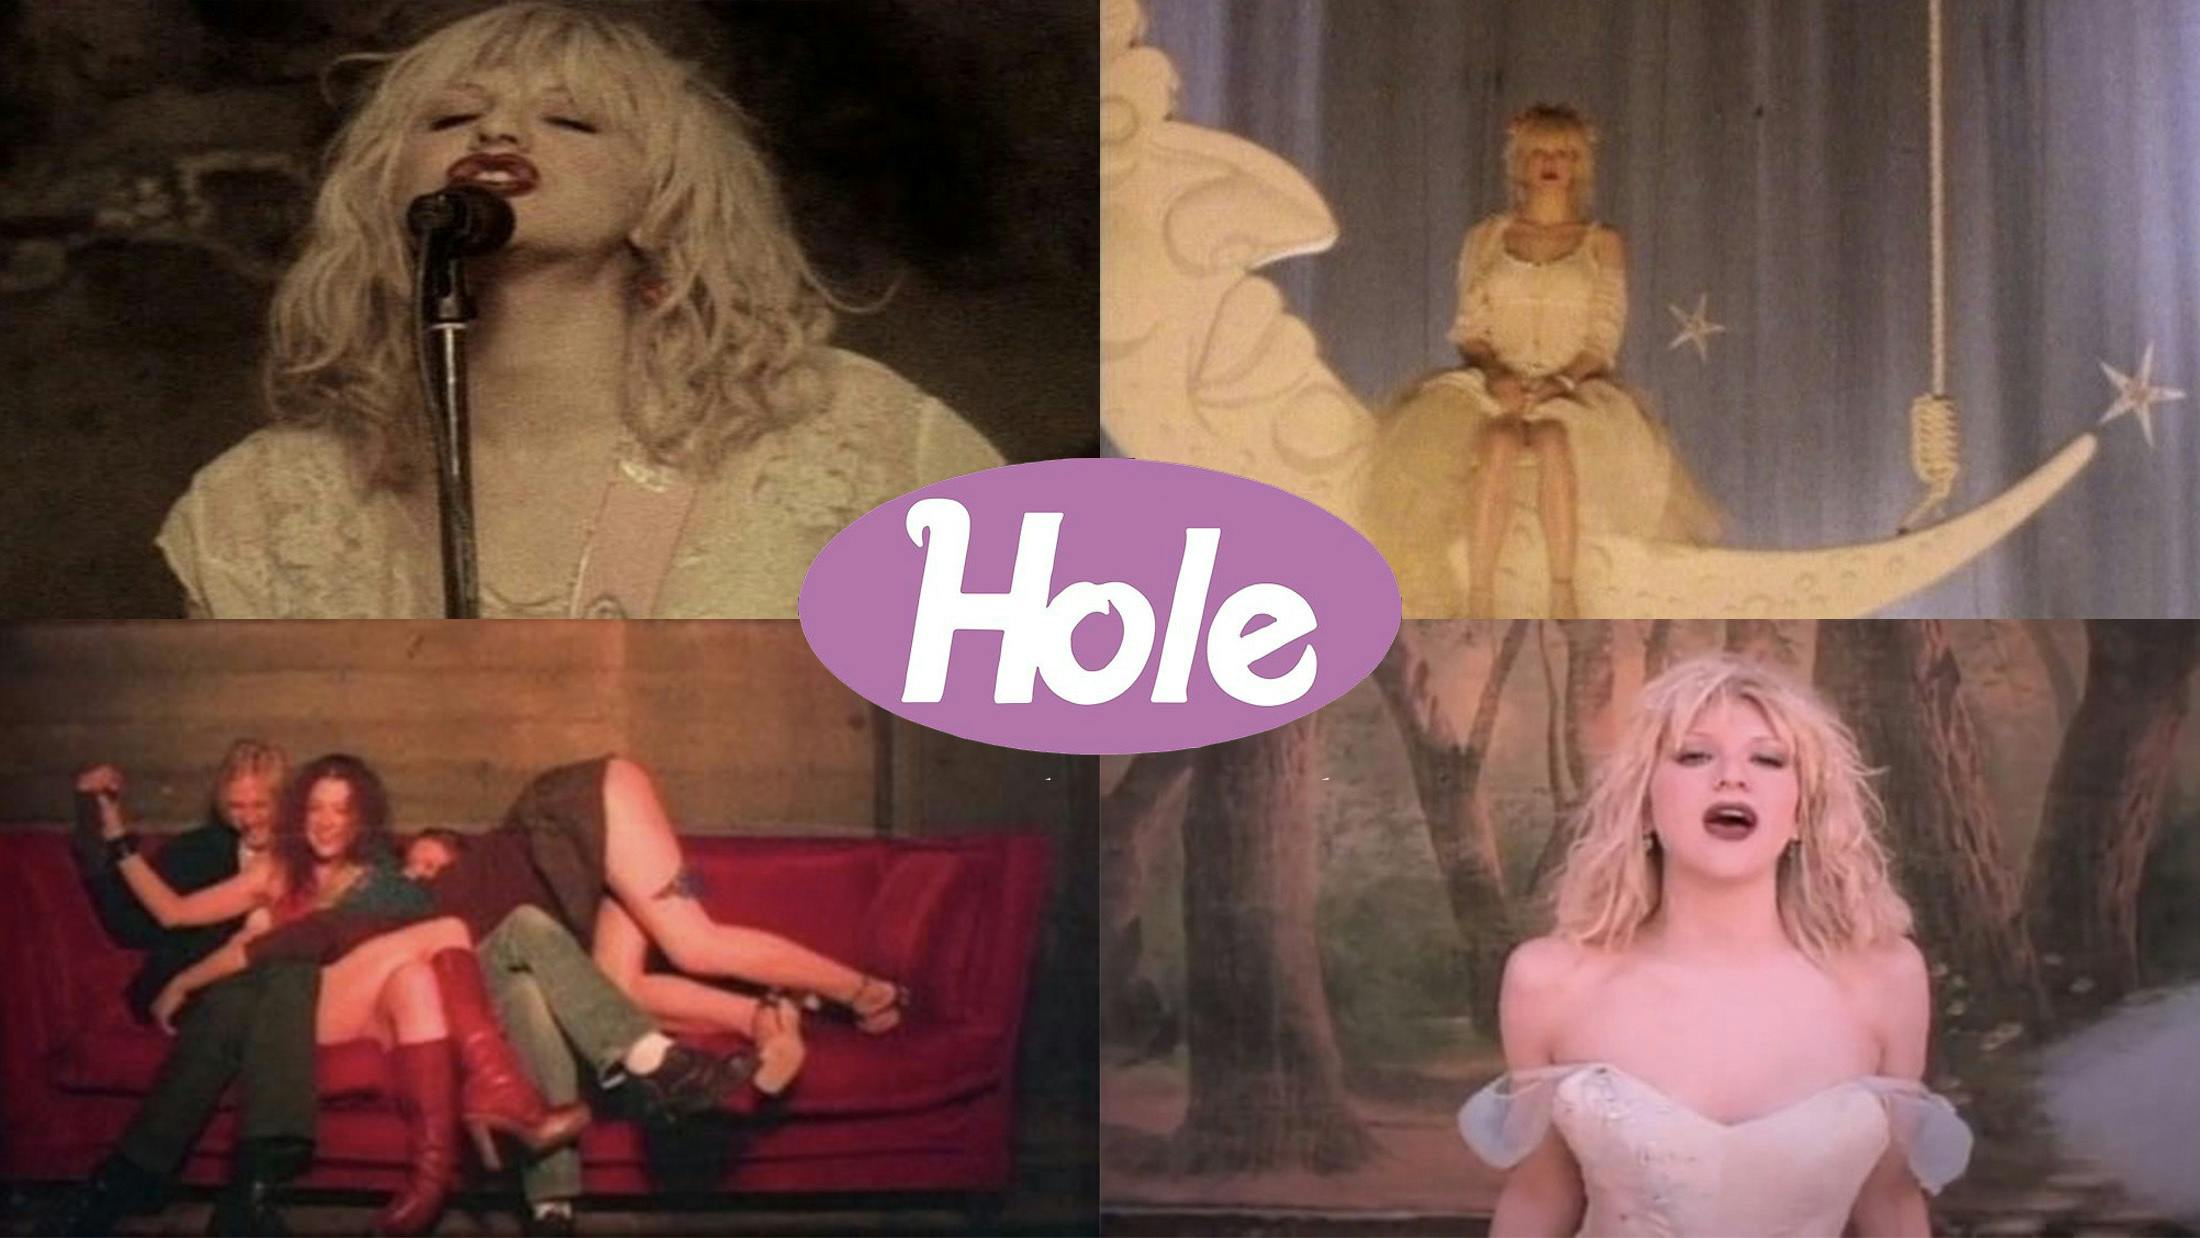 A deep dive into Hole’s music video for Violet